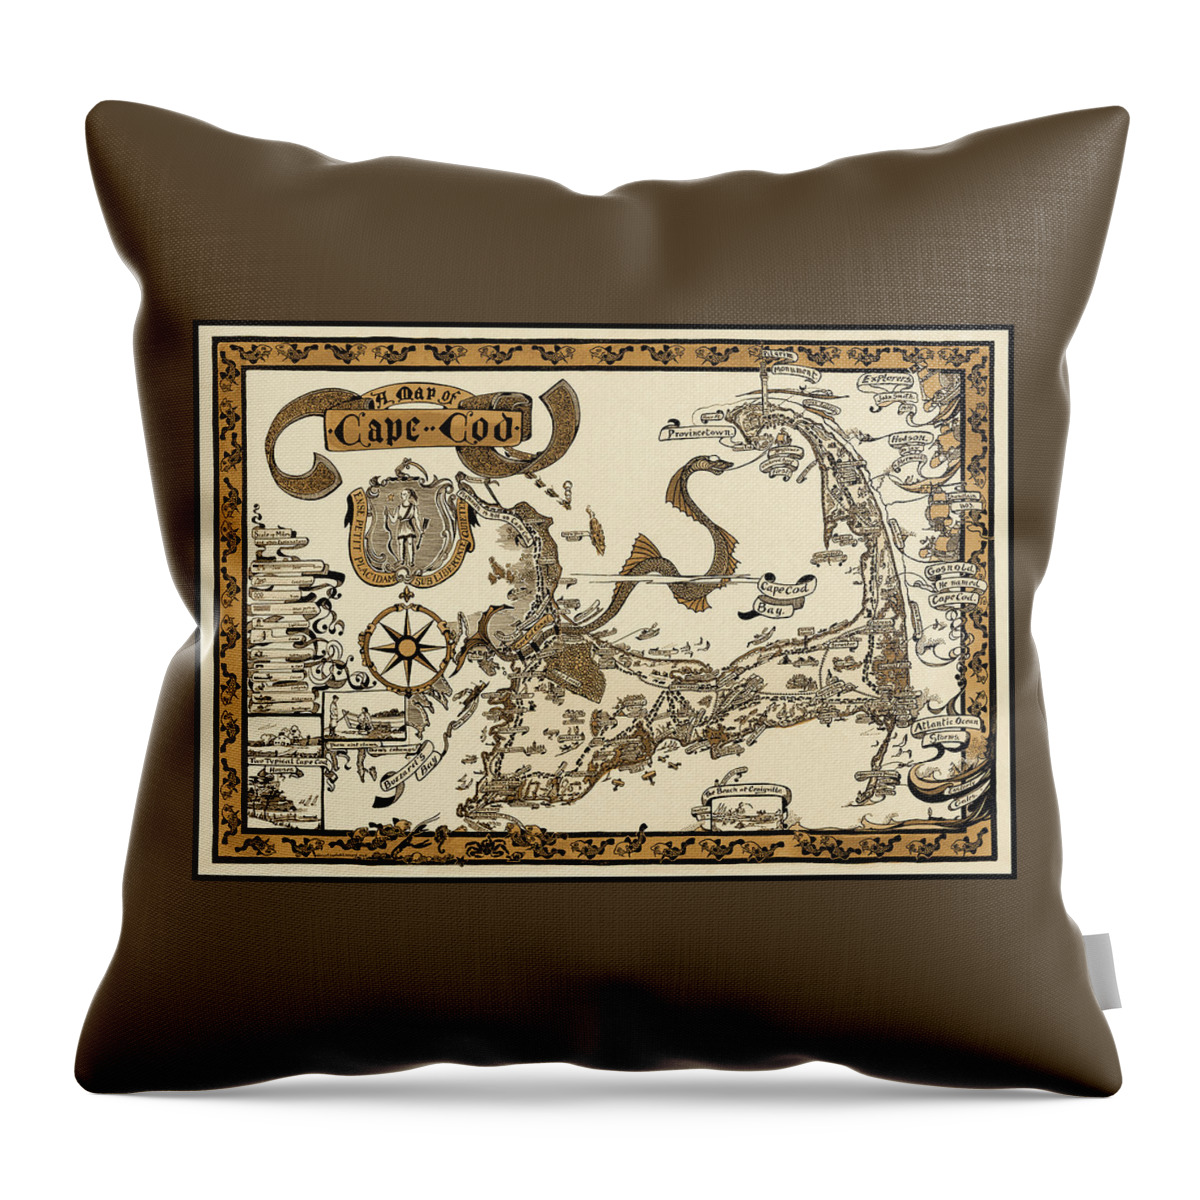 Cape Cod Throw Pillow featuring the photograph Cape Cod Antique Vintage Pictorial Map 1926 Sepia by Carol Japp